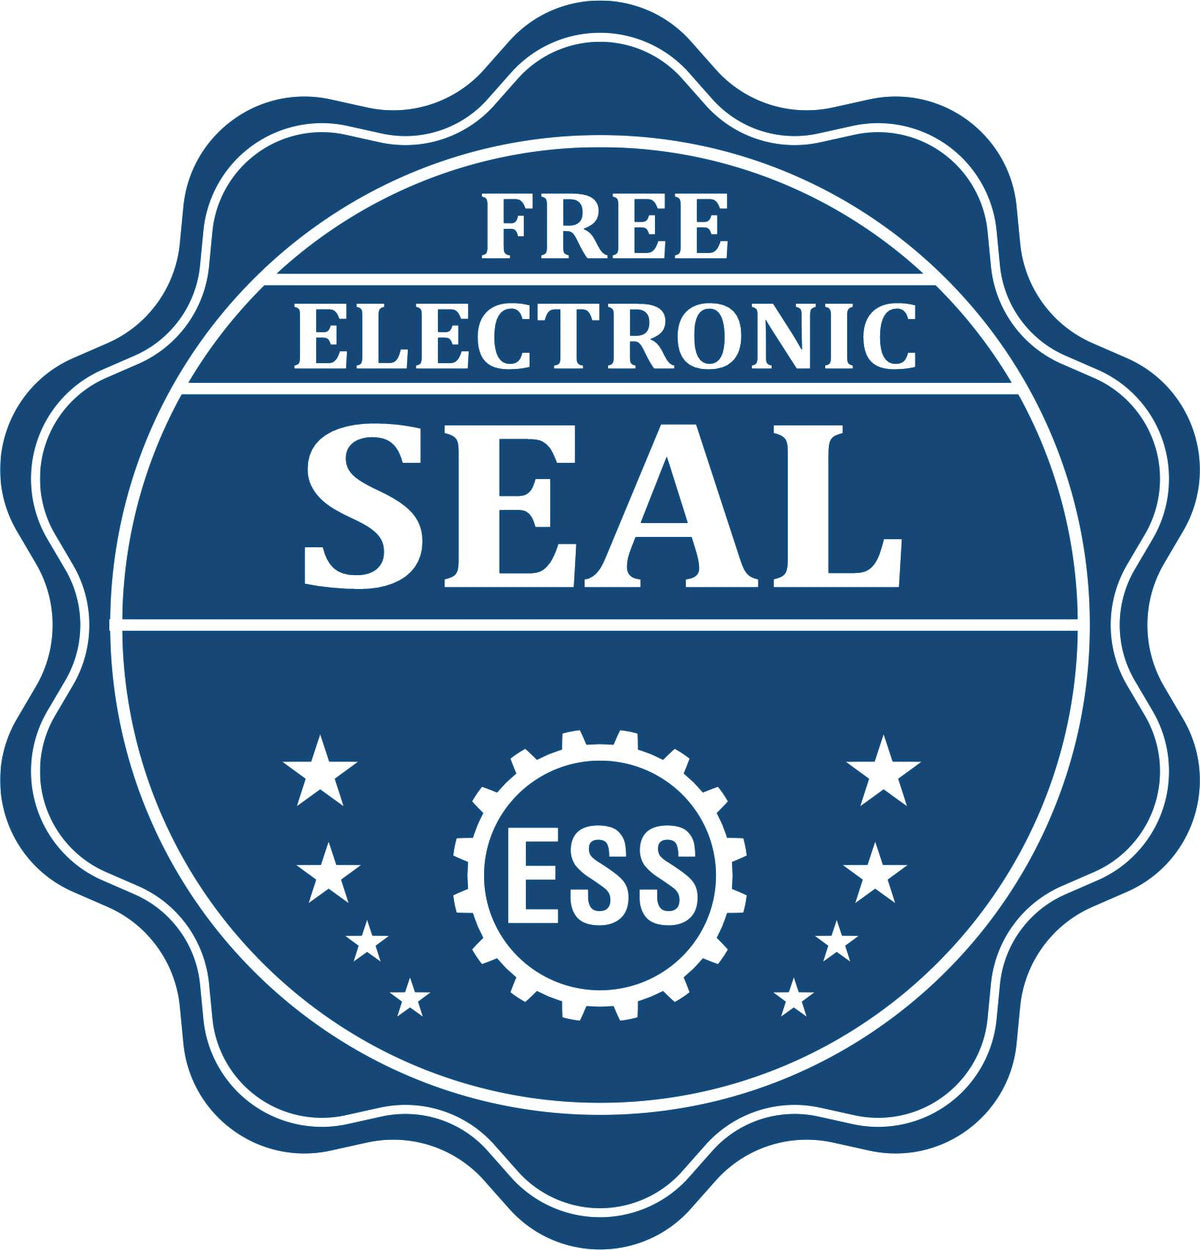 A badge showing a free electronic seal for the Slim Pre-Inked Guam Professional Engineer Seal Stamp with stars and the ESS gear on the emblem.